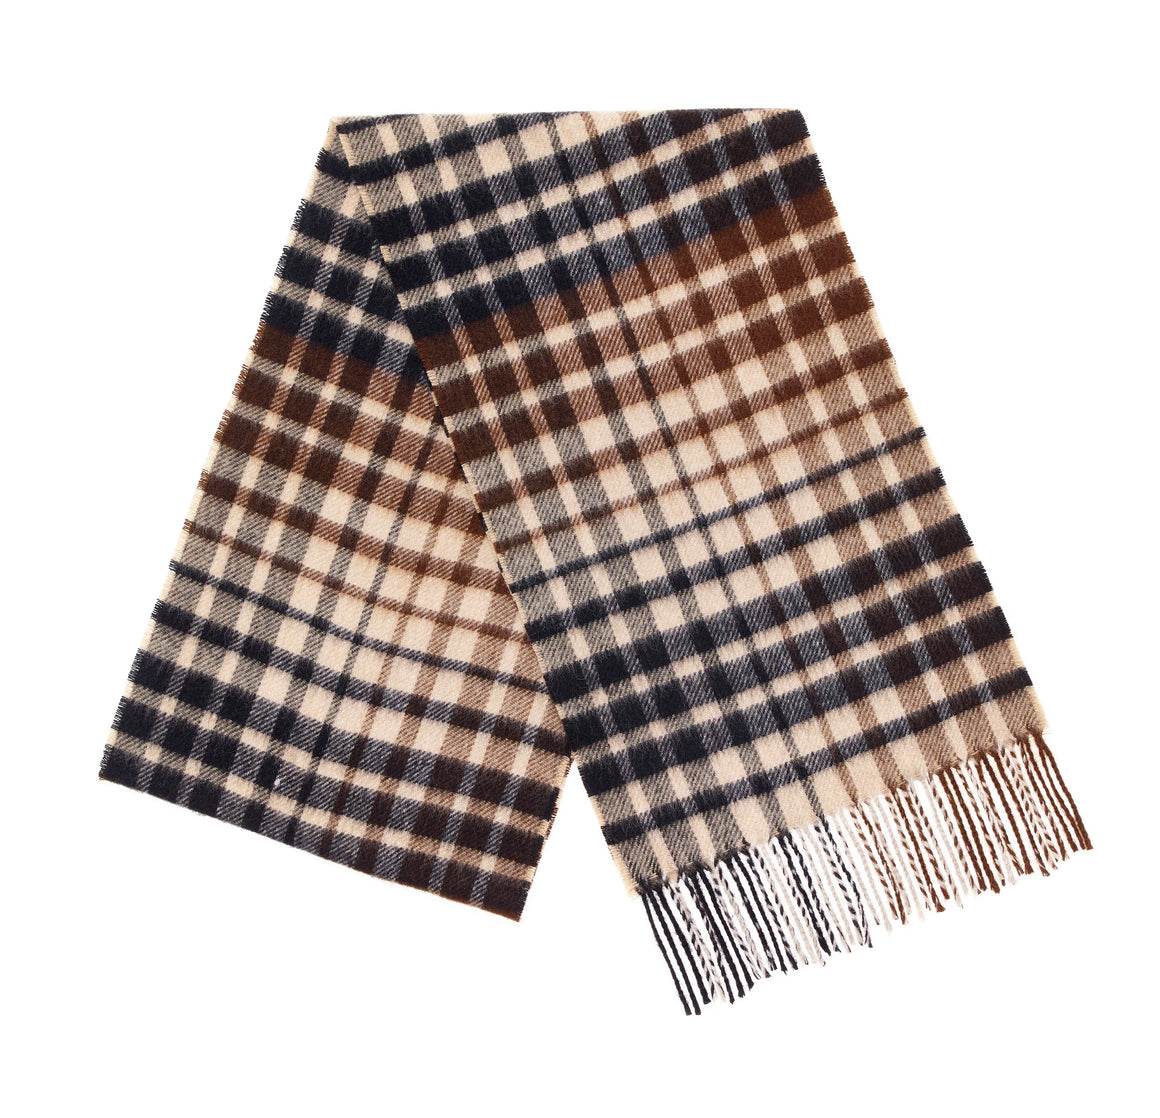 Merino Lambswool Scarf - Headrow Camel/Brown - Made in England,